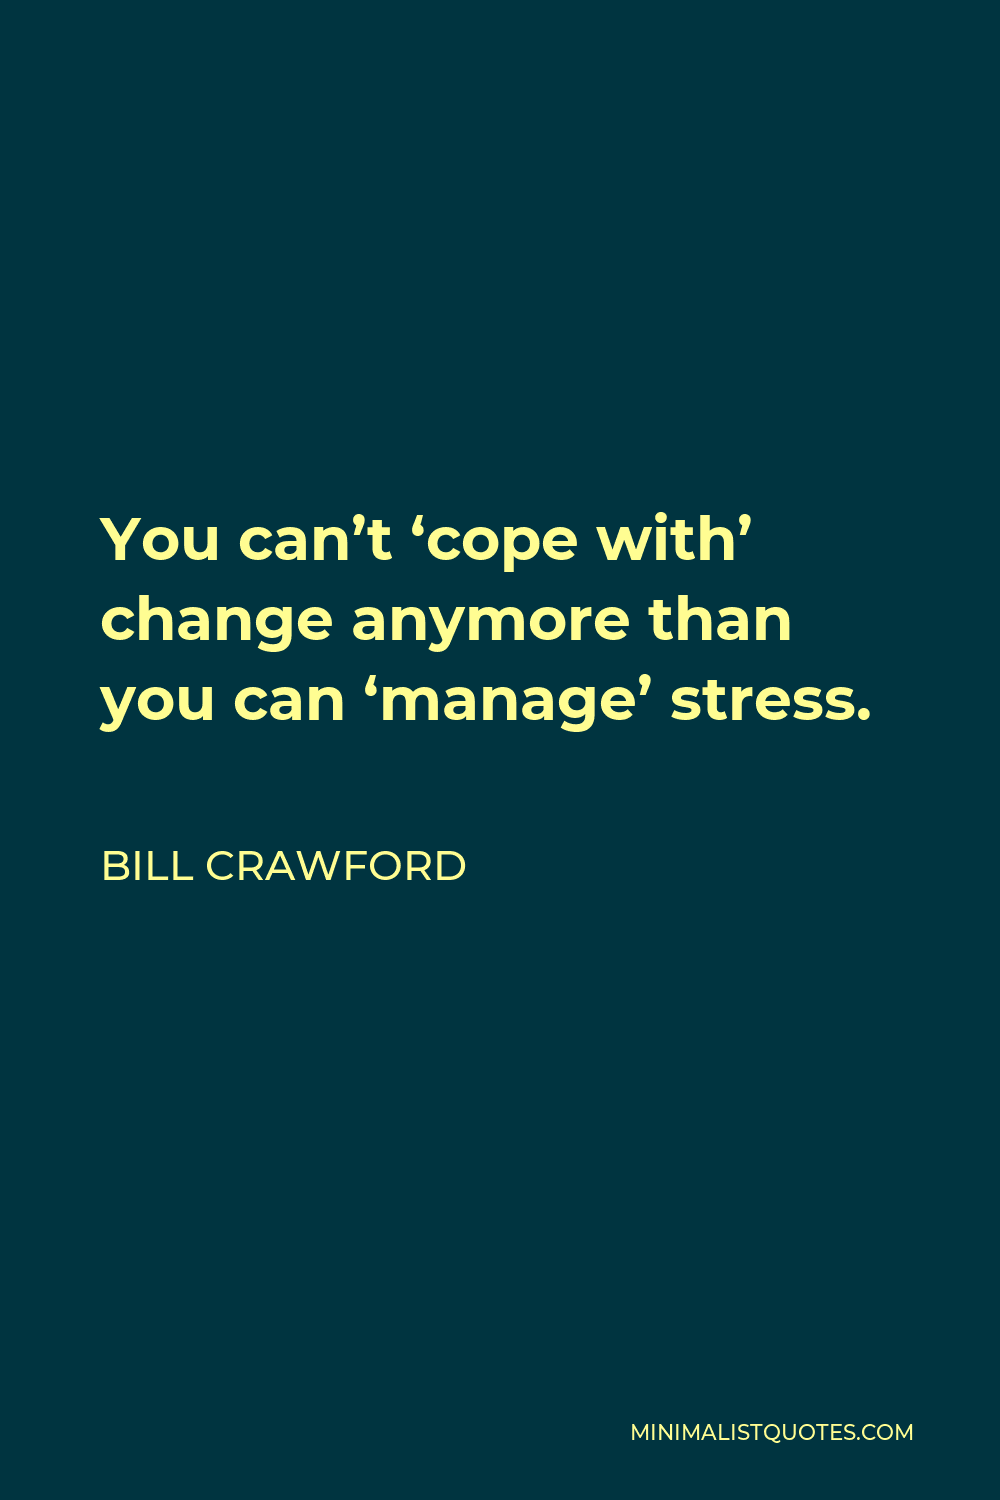 Bill Crawford Quote - You can’t ‘cope with’ change anymore than you can ‘manage’ stress.